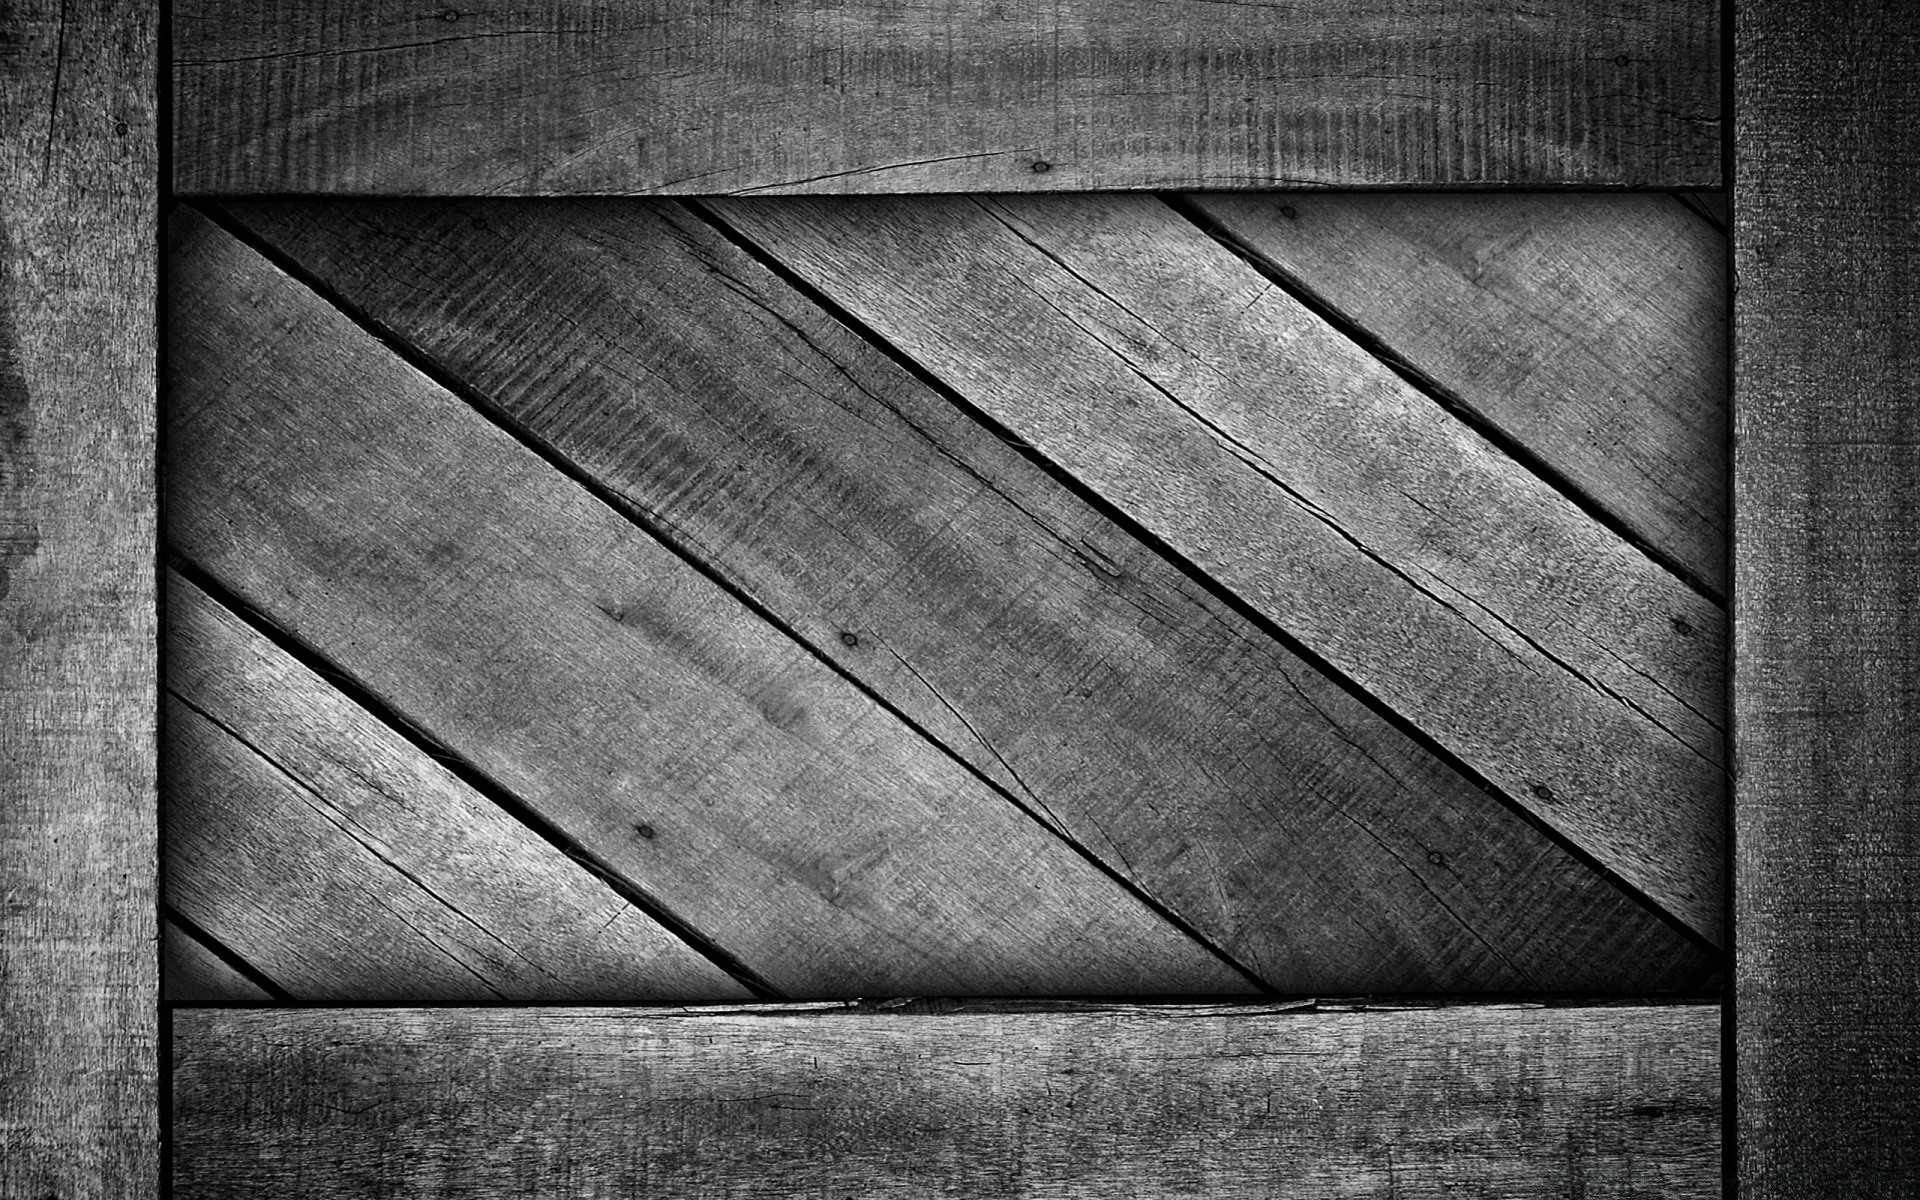 black and white texture vintage retro panel old wood board wall desktop fabric design surface wooden picture frame pattern abstract dirty log layout background